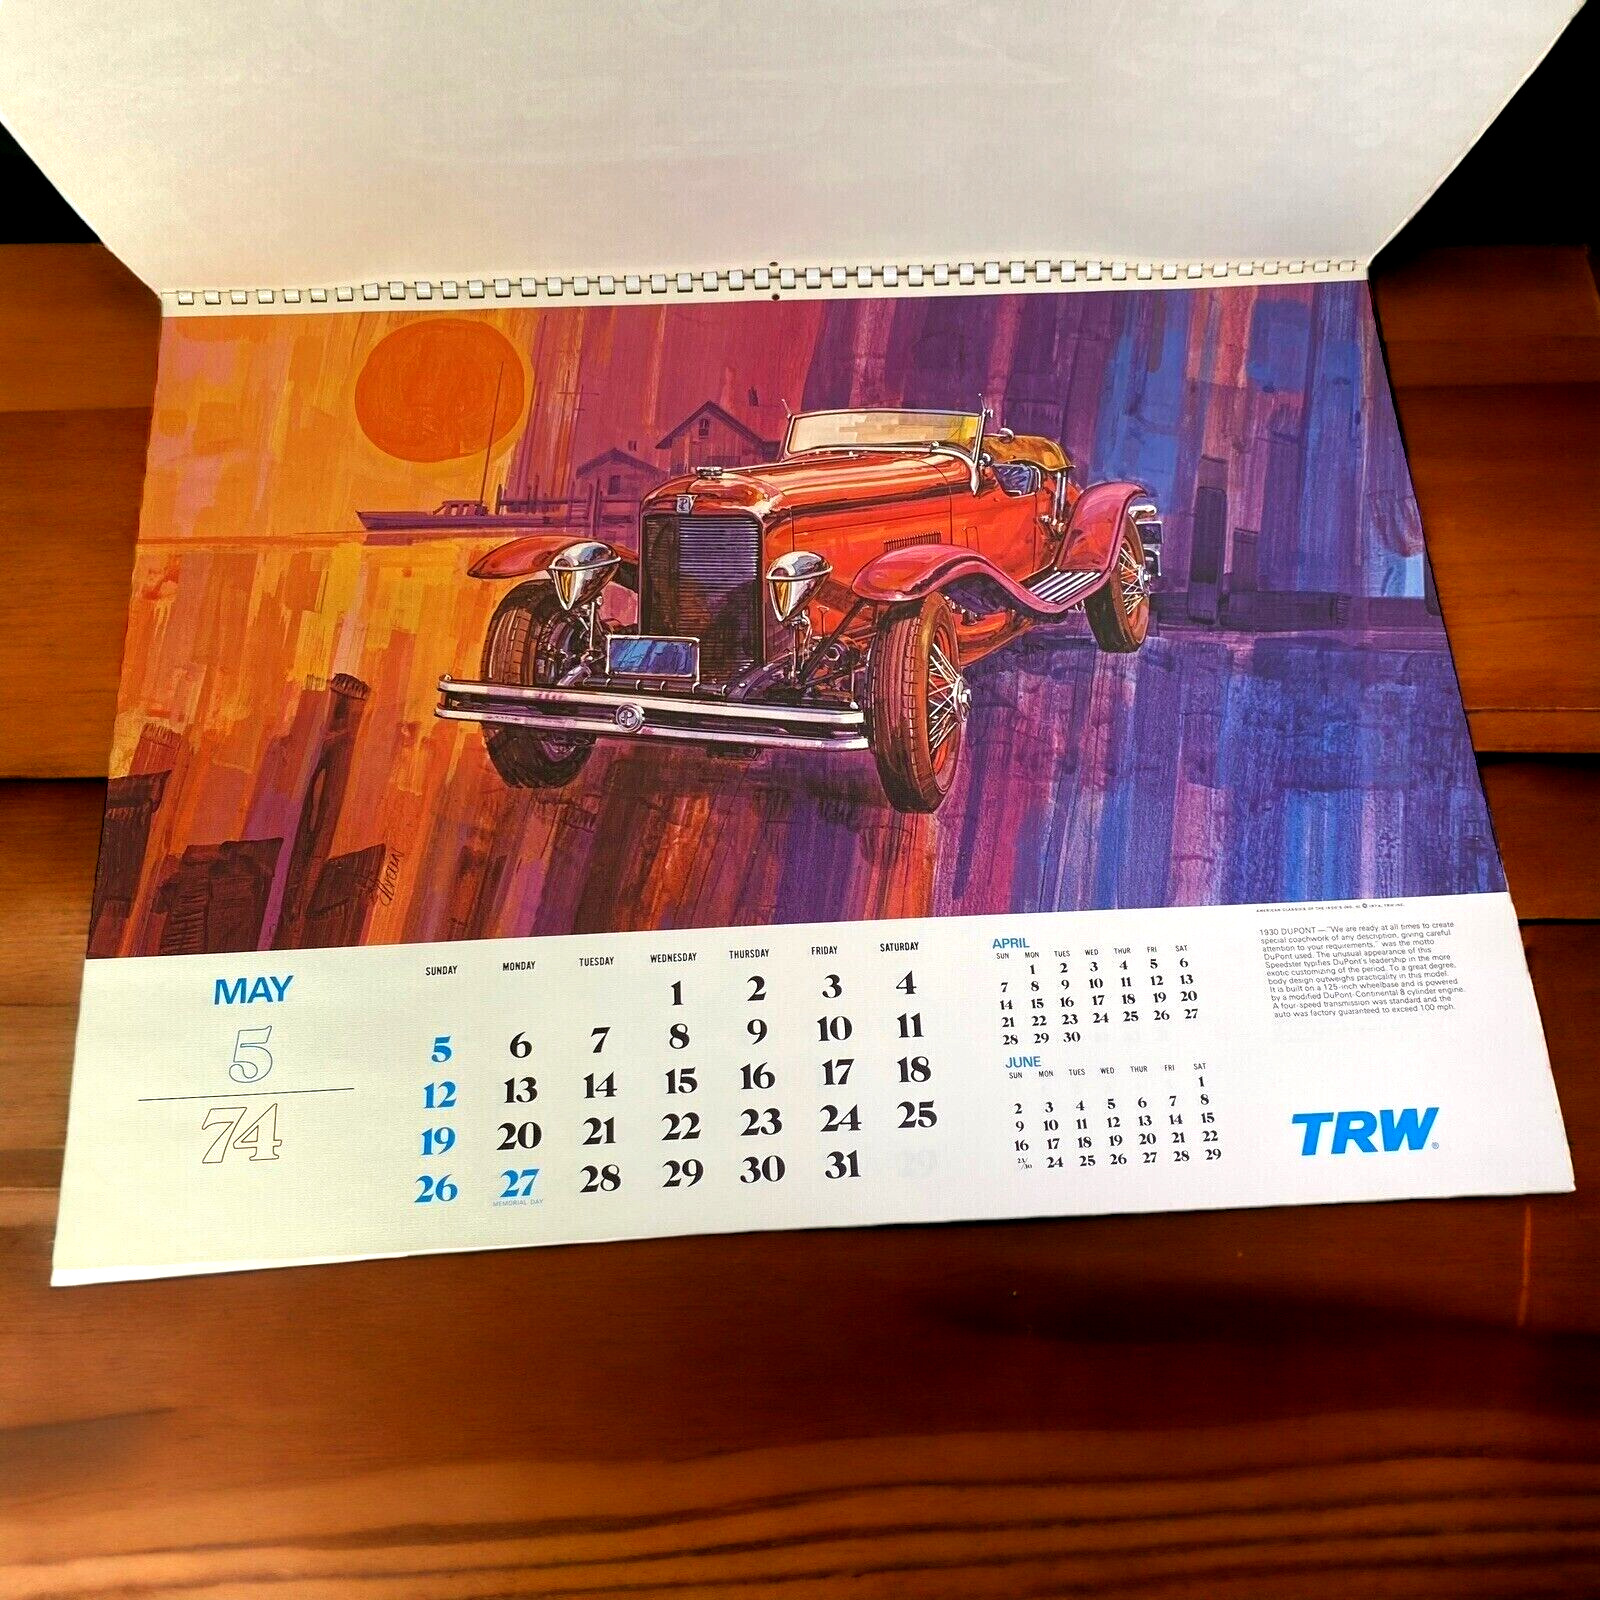 TRW 1974 Large Calendar with D. Brown Art on every page, 23x18, Vintage